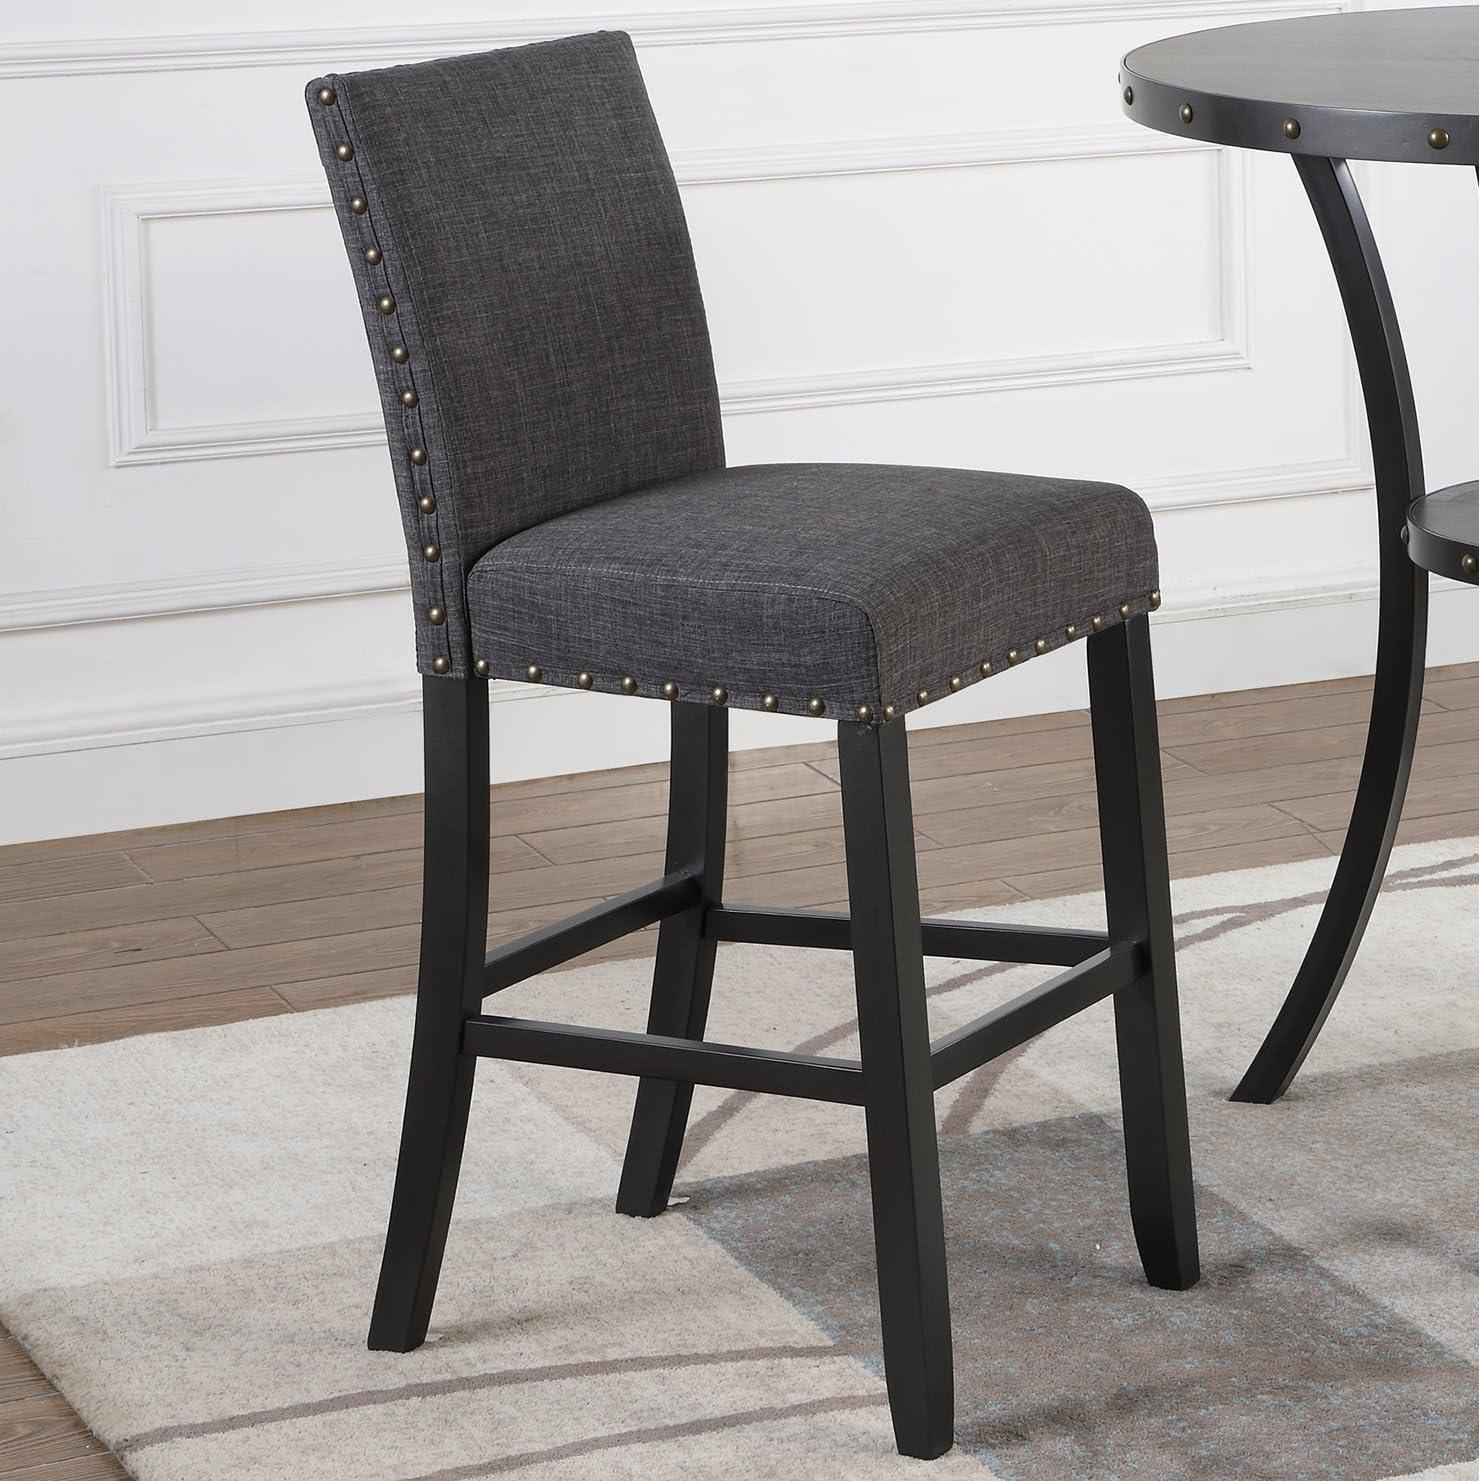 Espresso Hardwood Contemporary Bar Stools with Gray Linen Upholstery, Set of 2